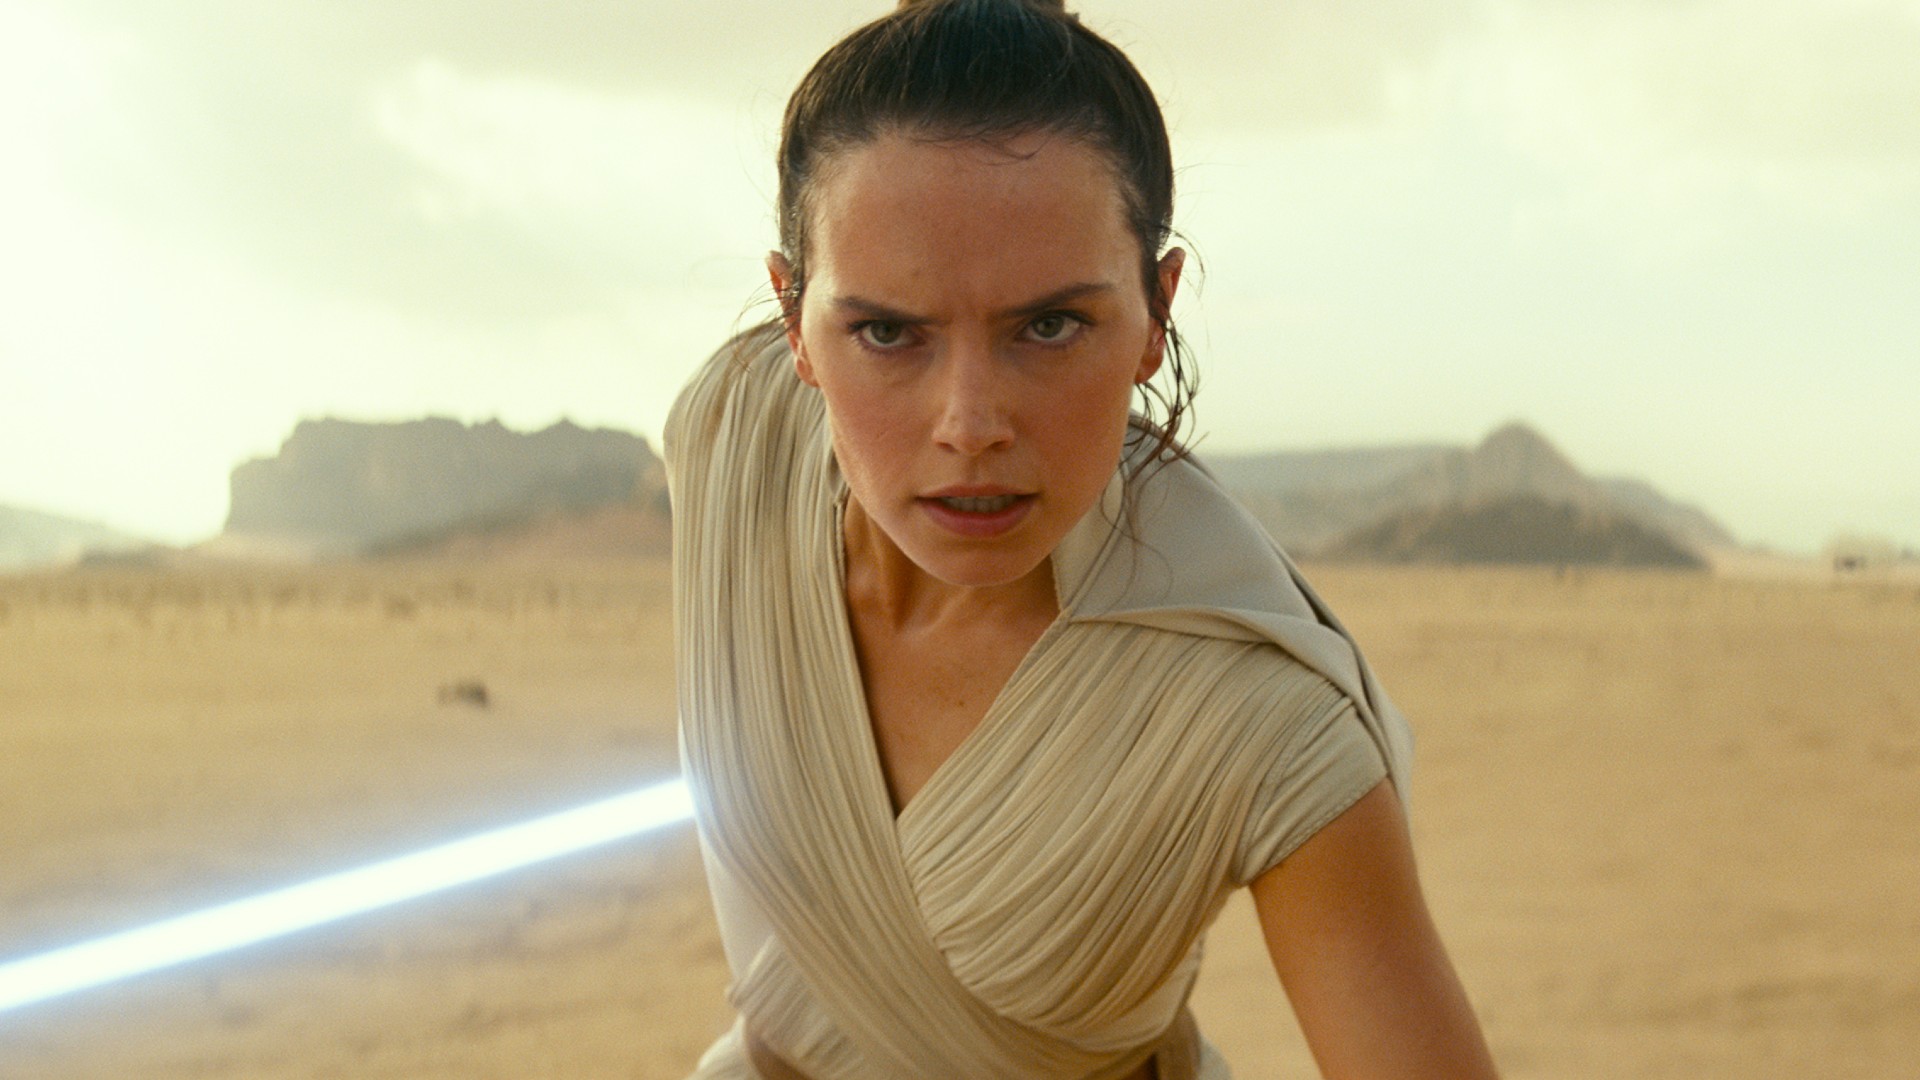 Daisy Ridley's top-rated movies and TV shows, according to IMDb